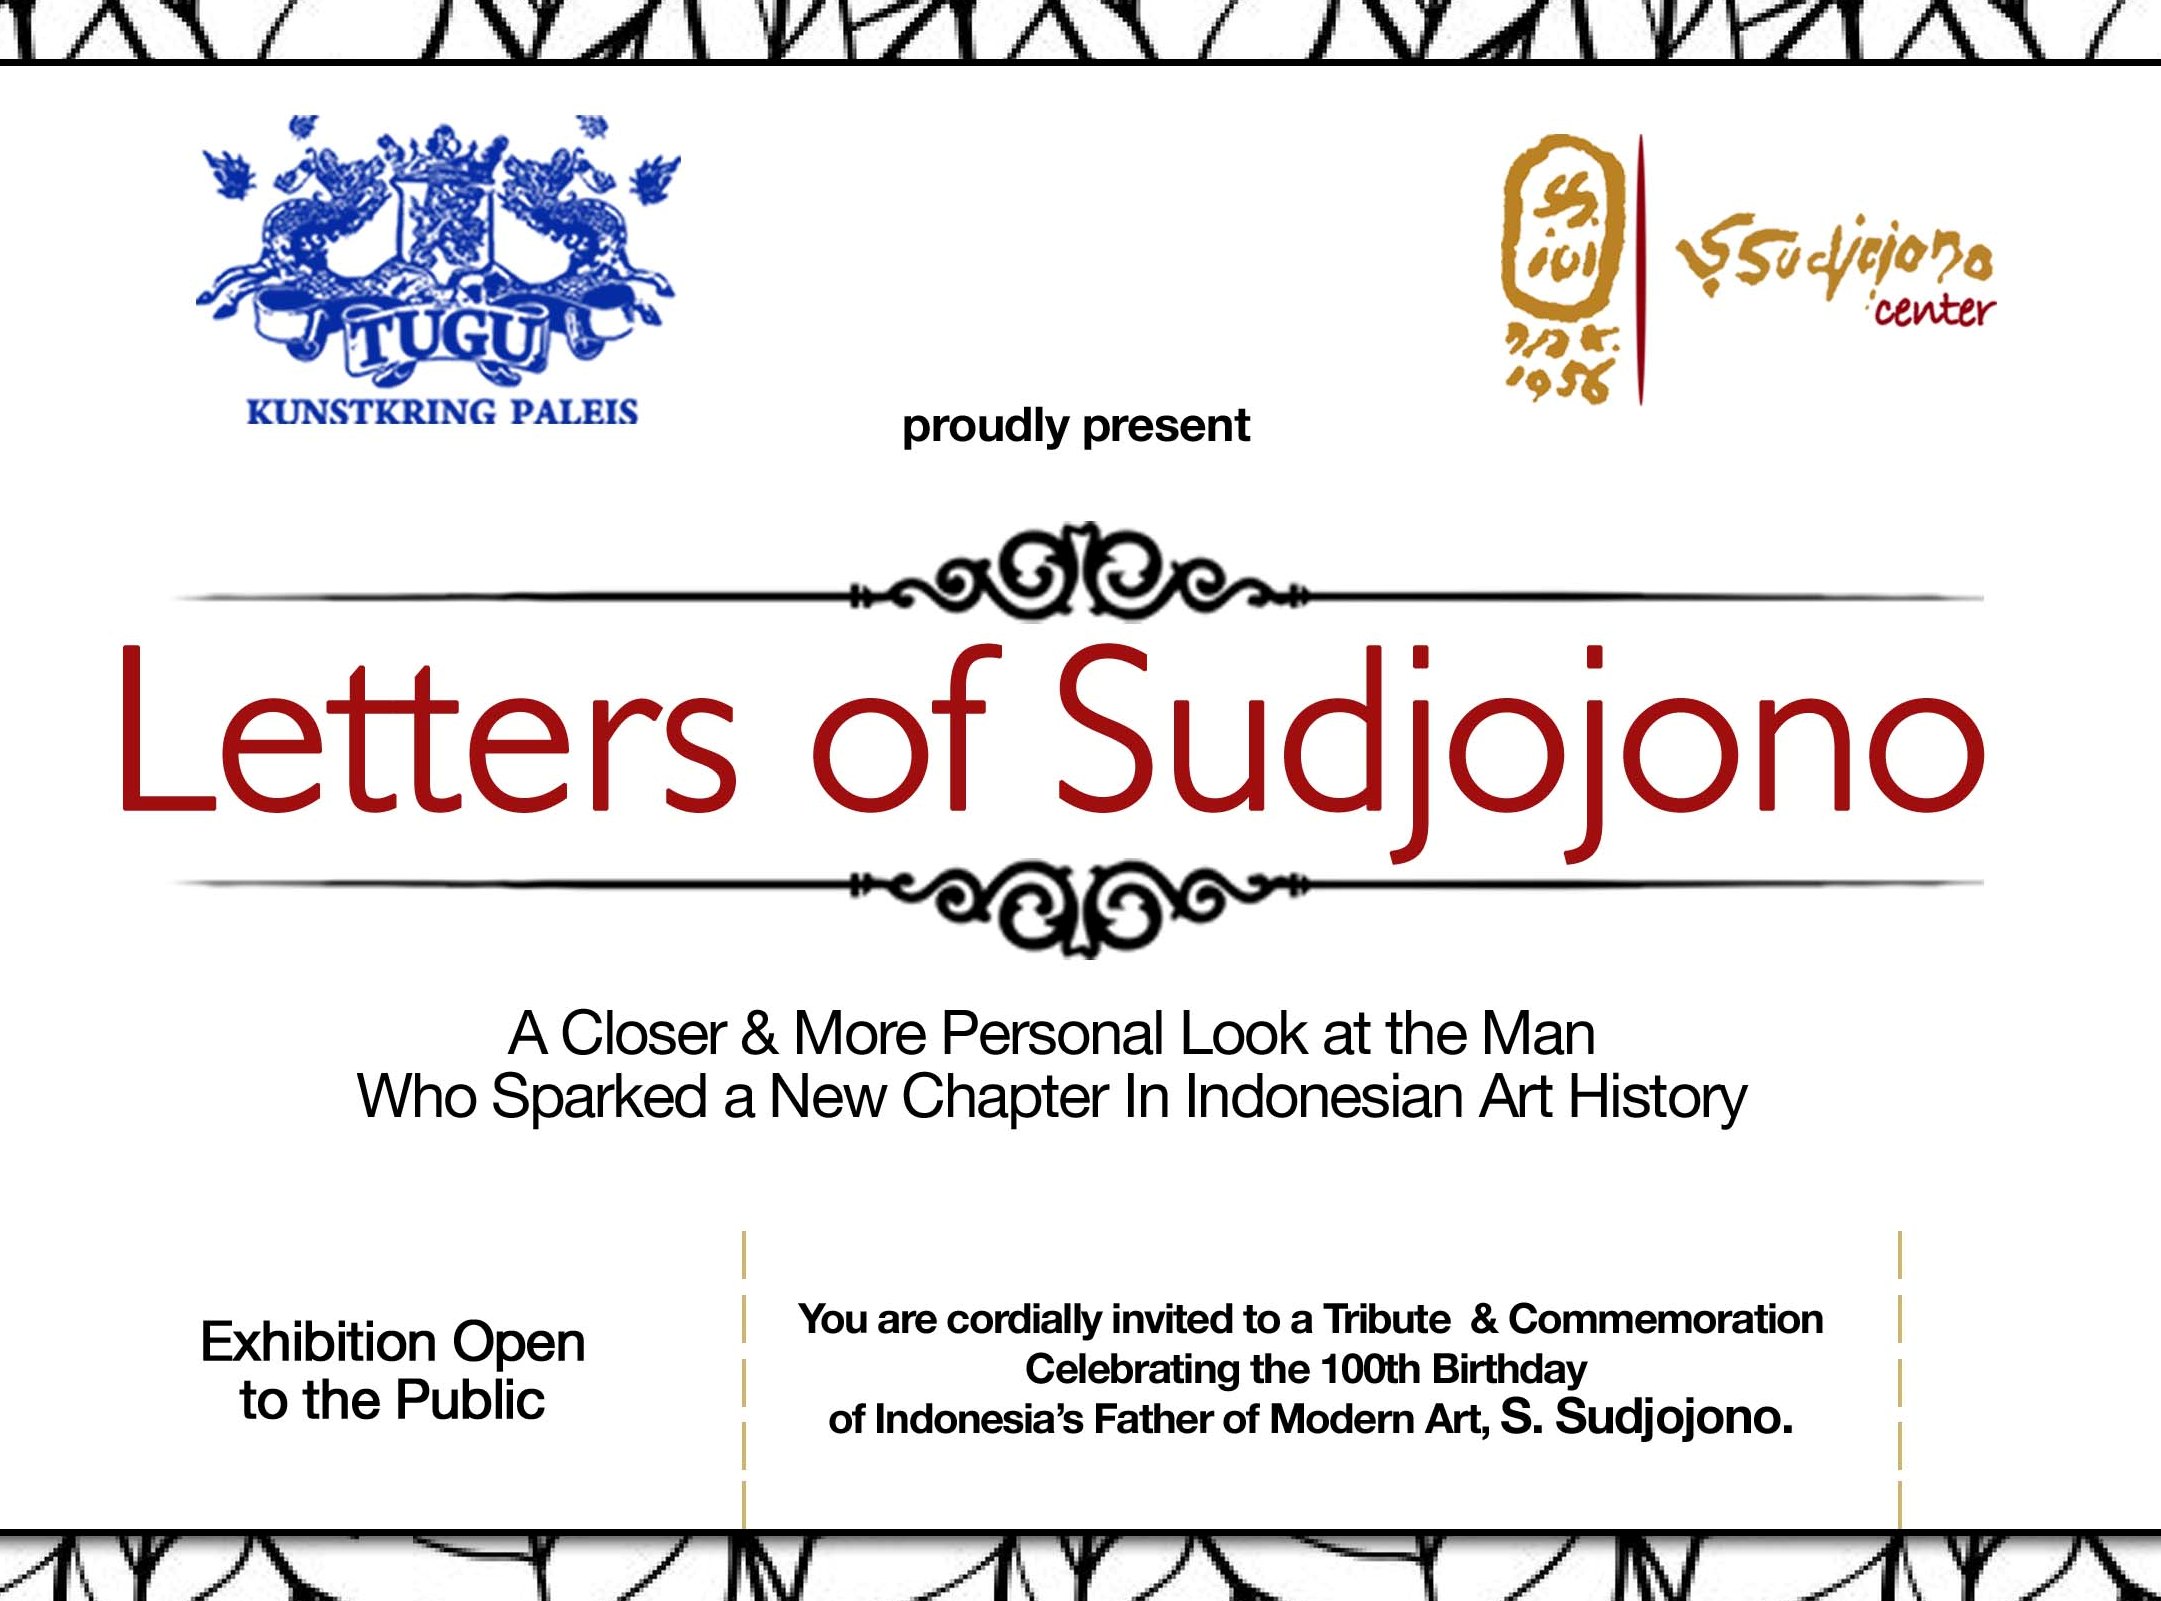 letters of sudjojono - a closer & more personal look at the man who sparked a new chapter in indonesian art history - tugu kunstkring paleis